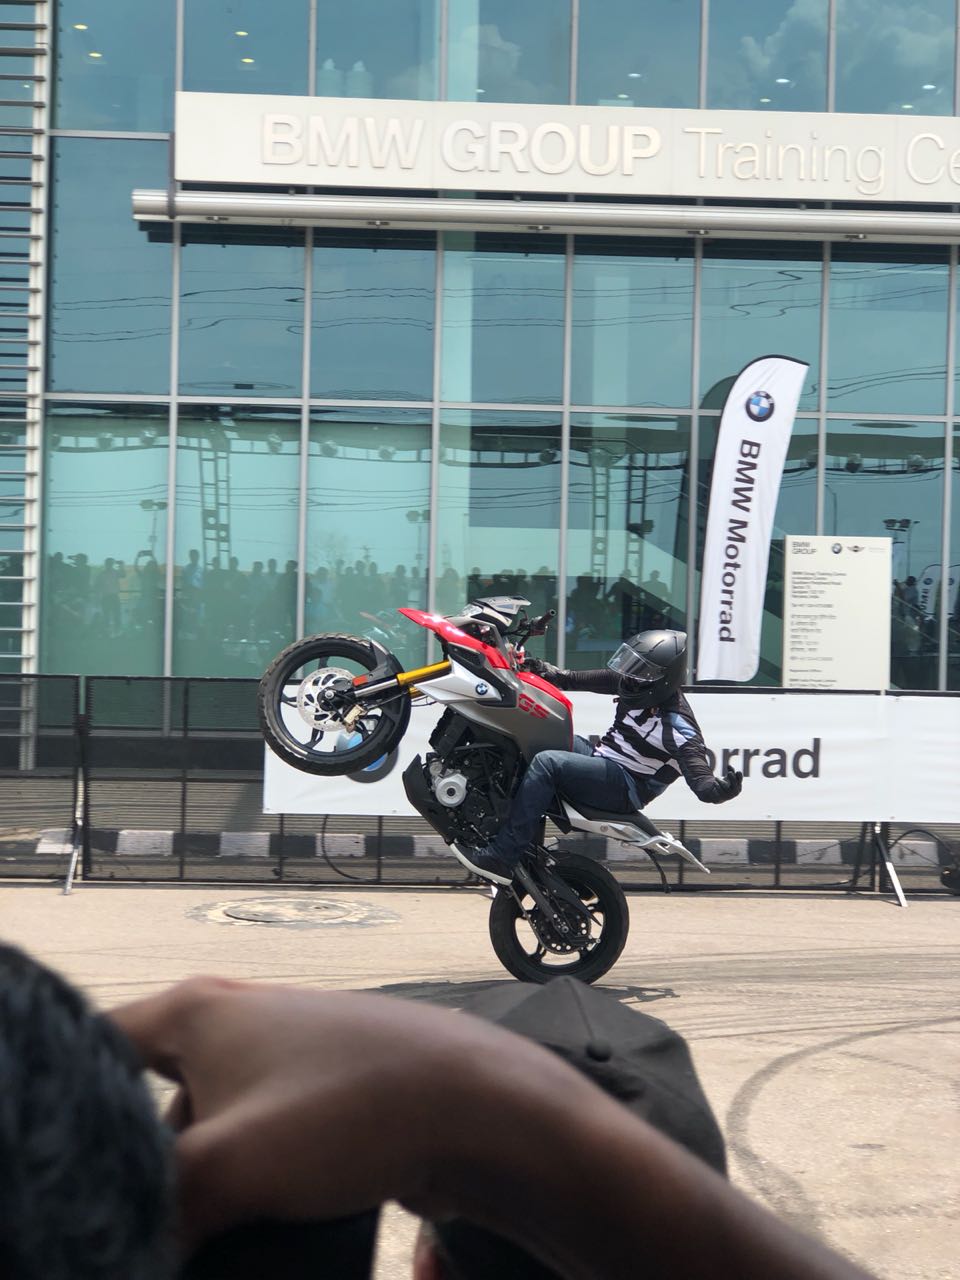 <p><br />
Both bikes are powered by a 313cc, single-cylinder, water-cooled motor which makes 34PS and 28Nm. It gets from 0 to 50 kmph in 2.5s and onto 143 kmph.</p>

